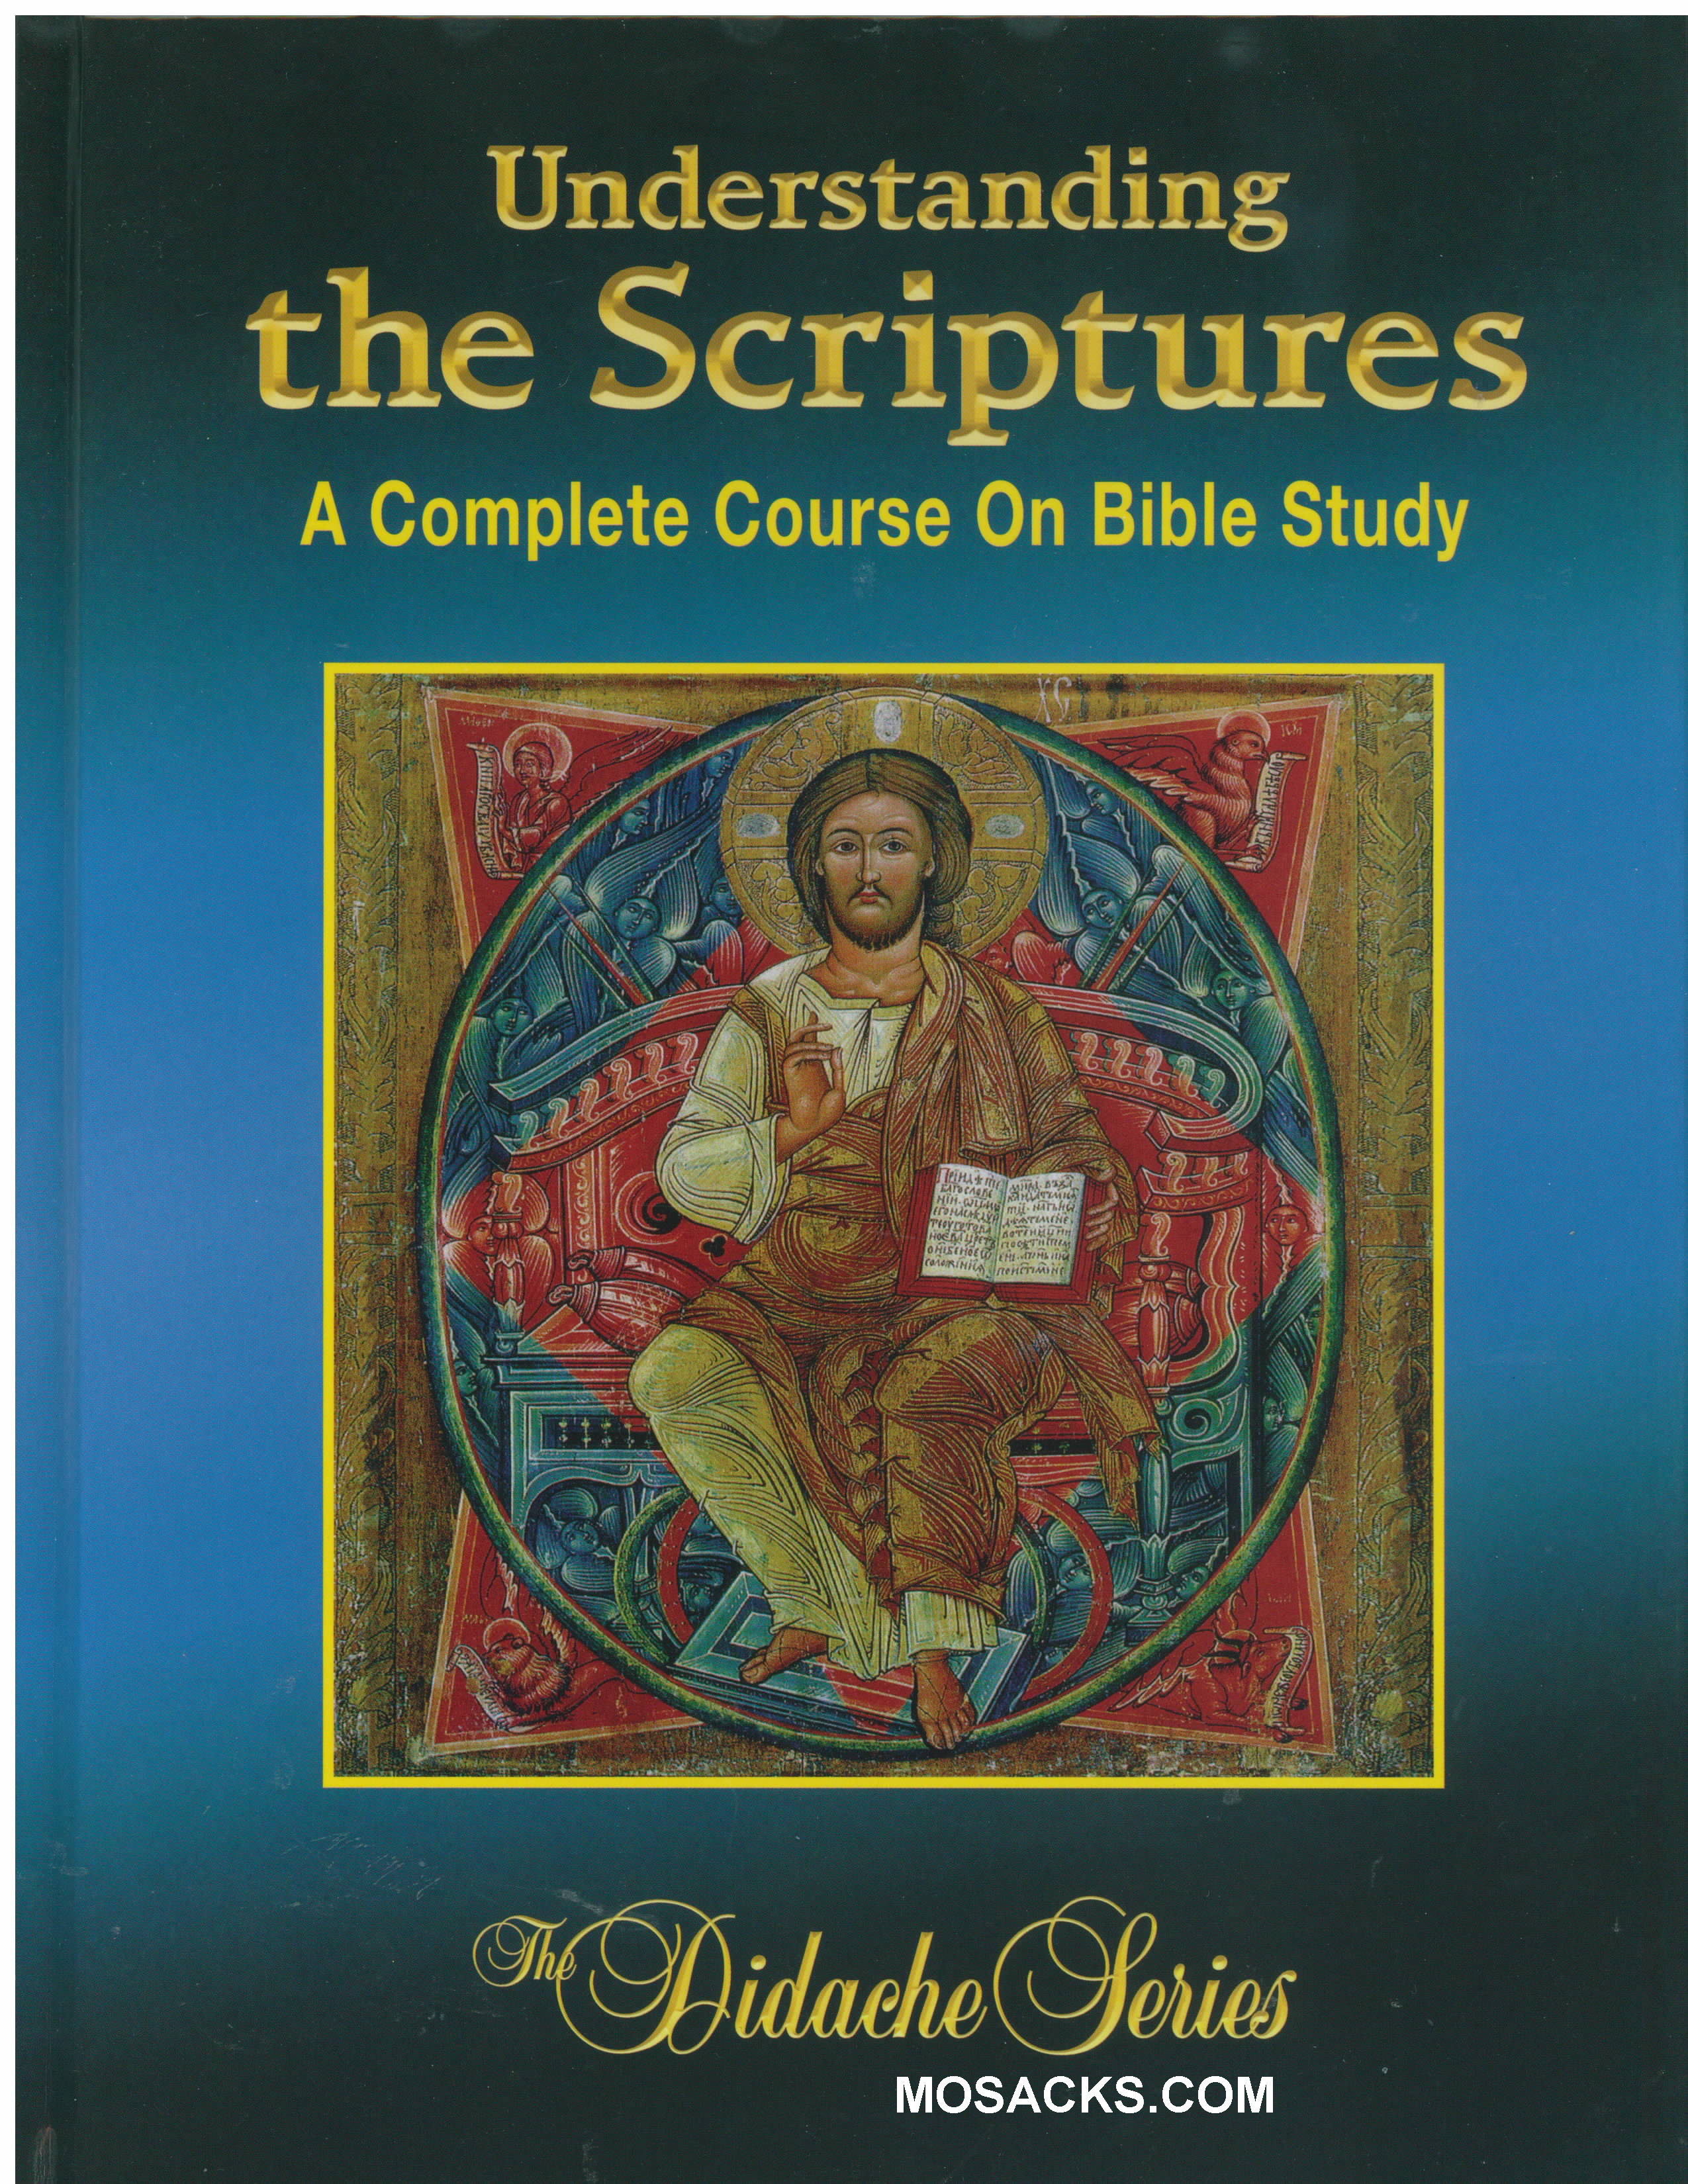 Understanding the Scriptures: A Complete Course On Bible Study by Dr. Scott Hahn 445-77478